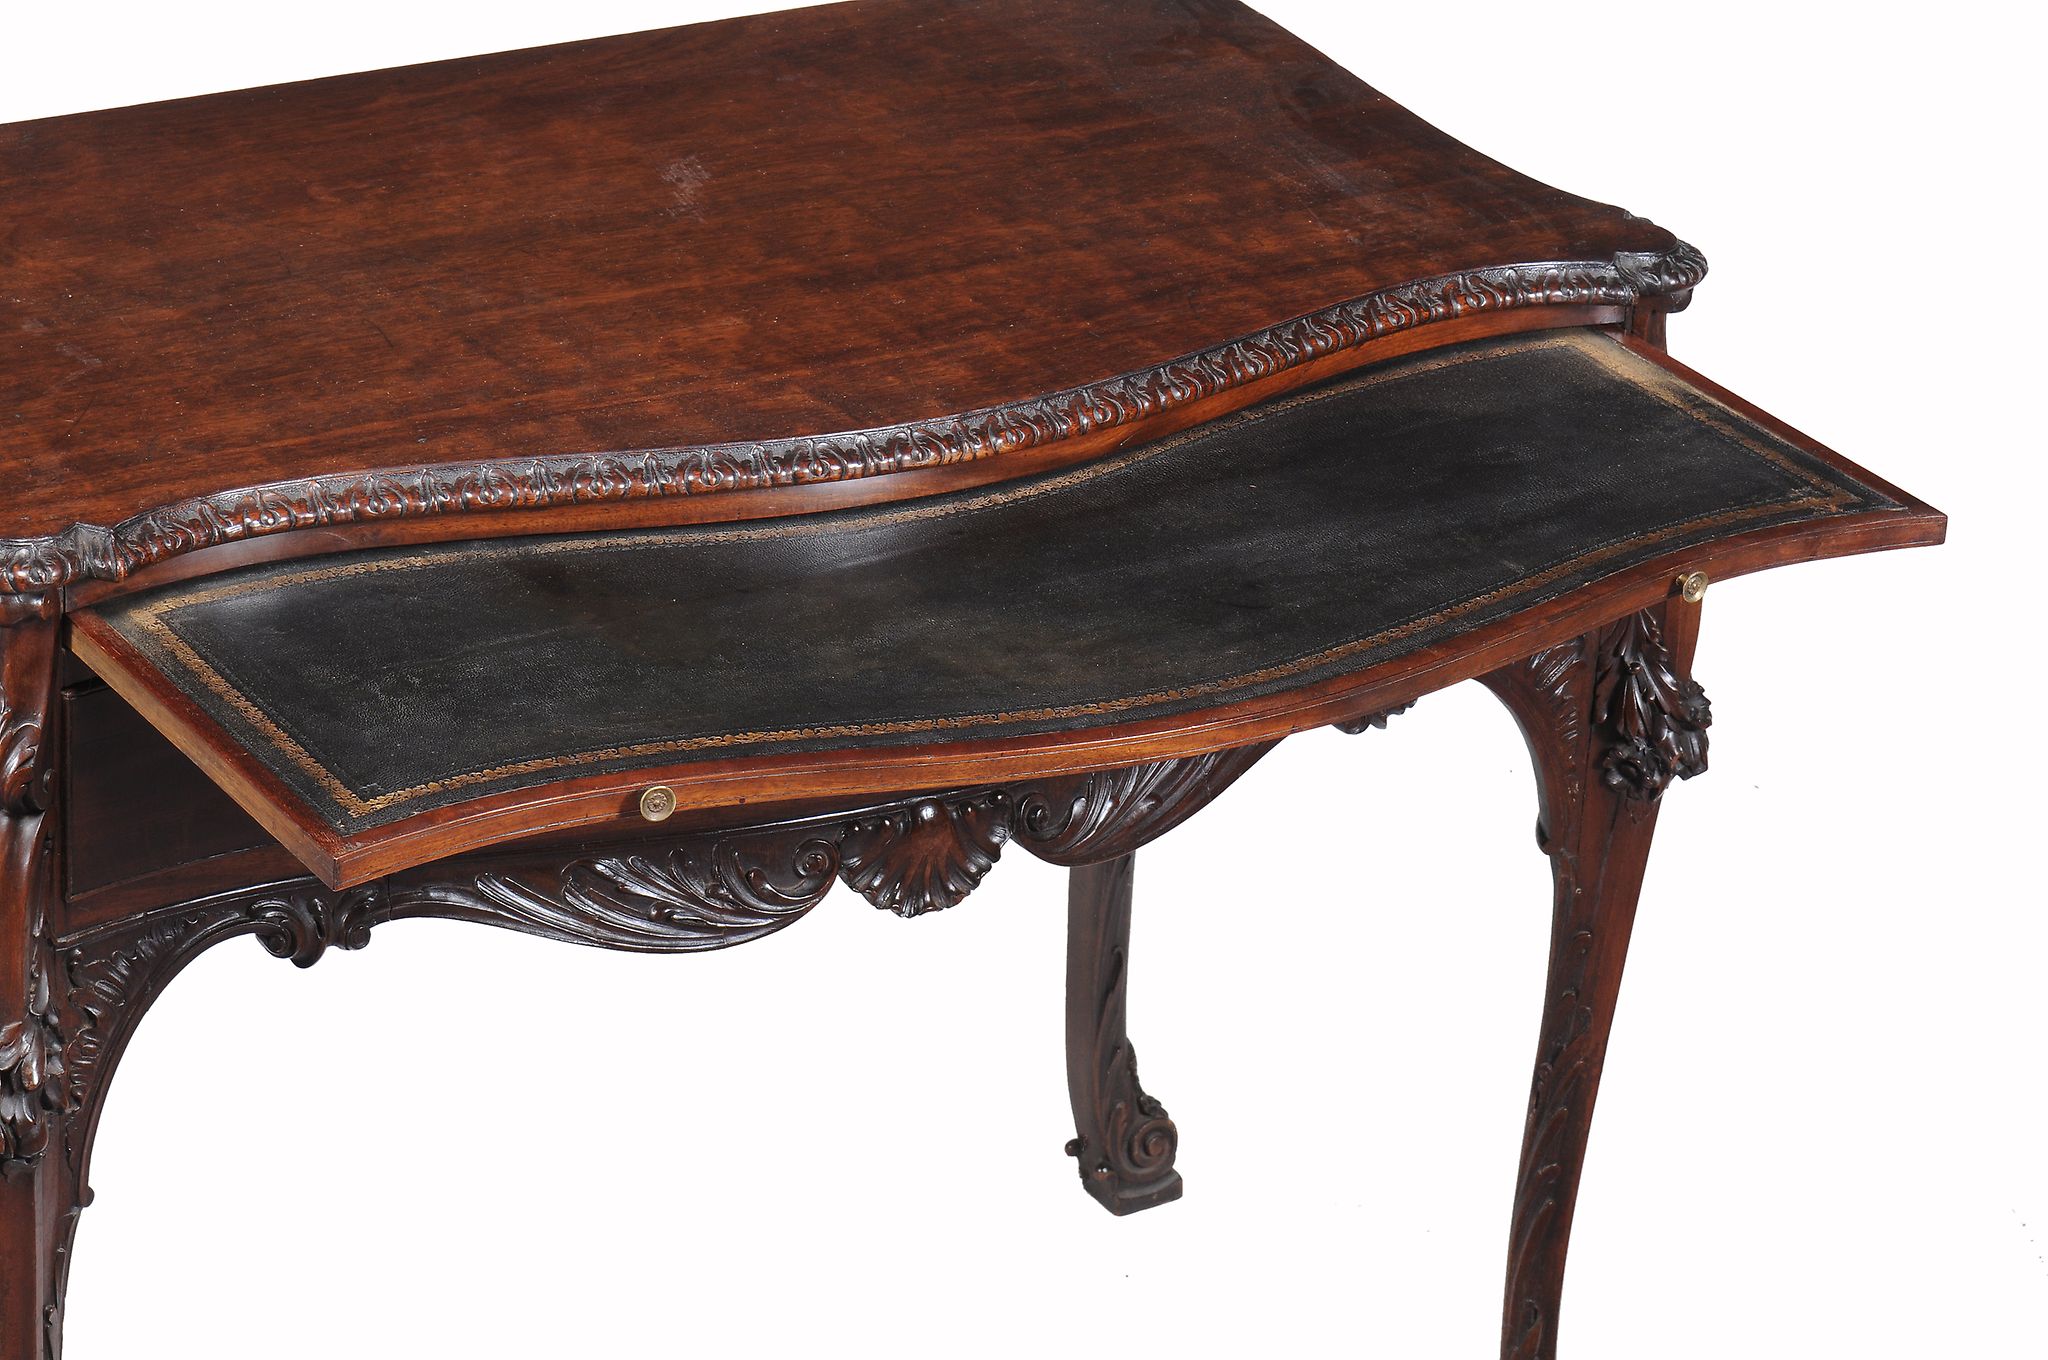 A George III mahogany side table, circa 1770, the serpentine shaped top with decorative leaf - Image 2 of 3